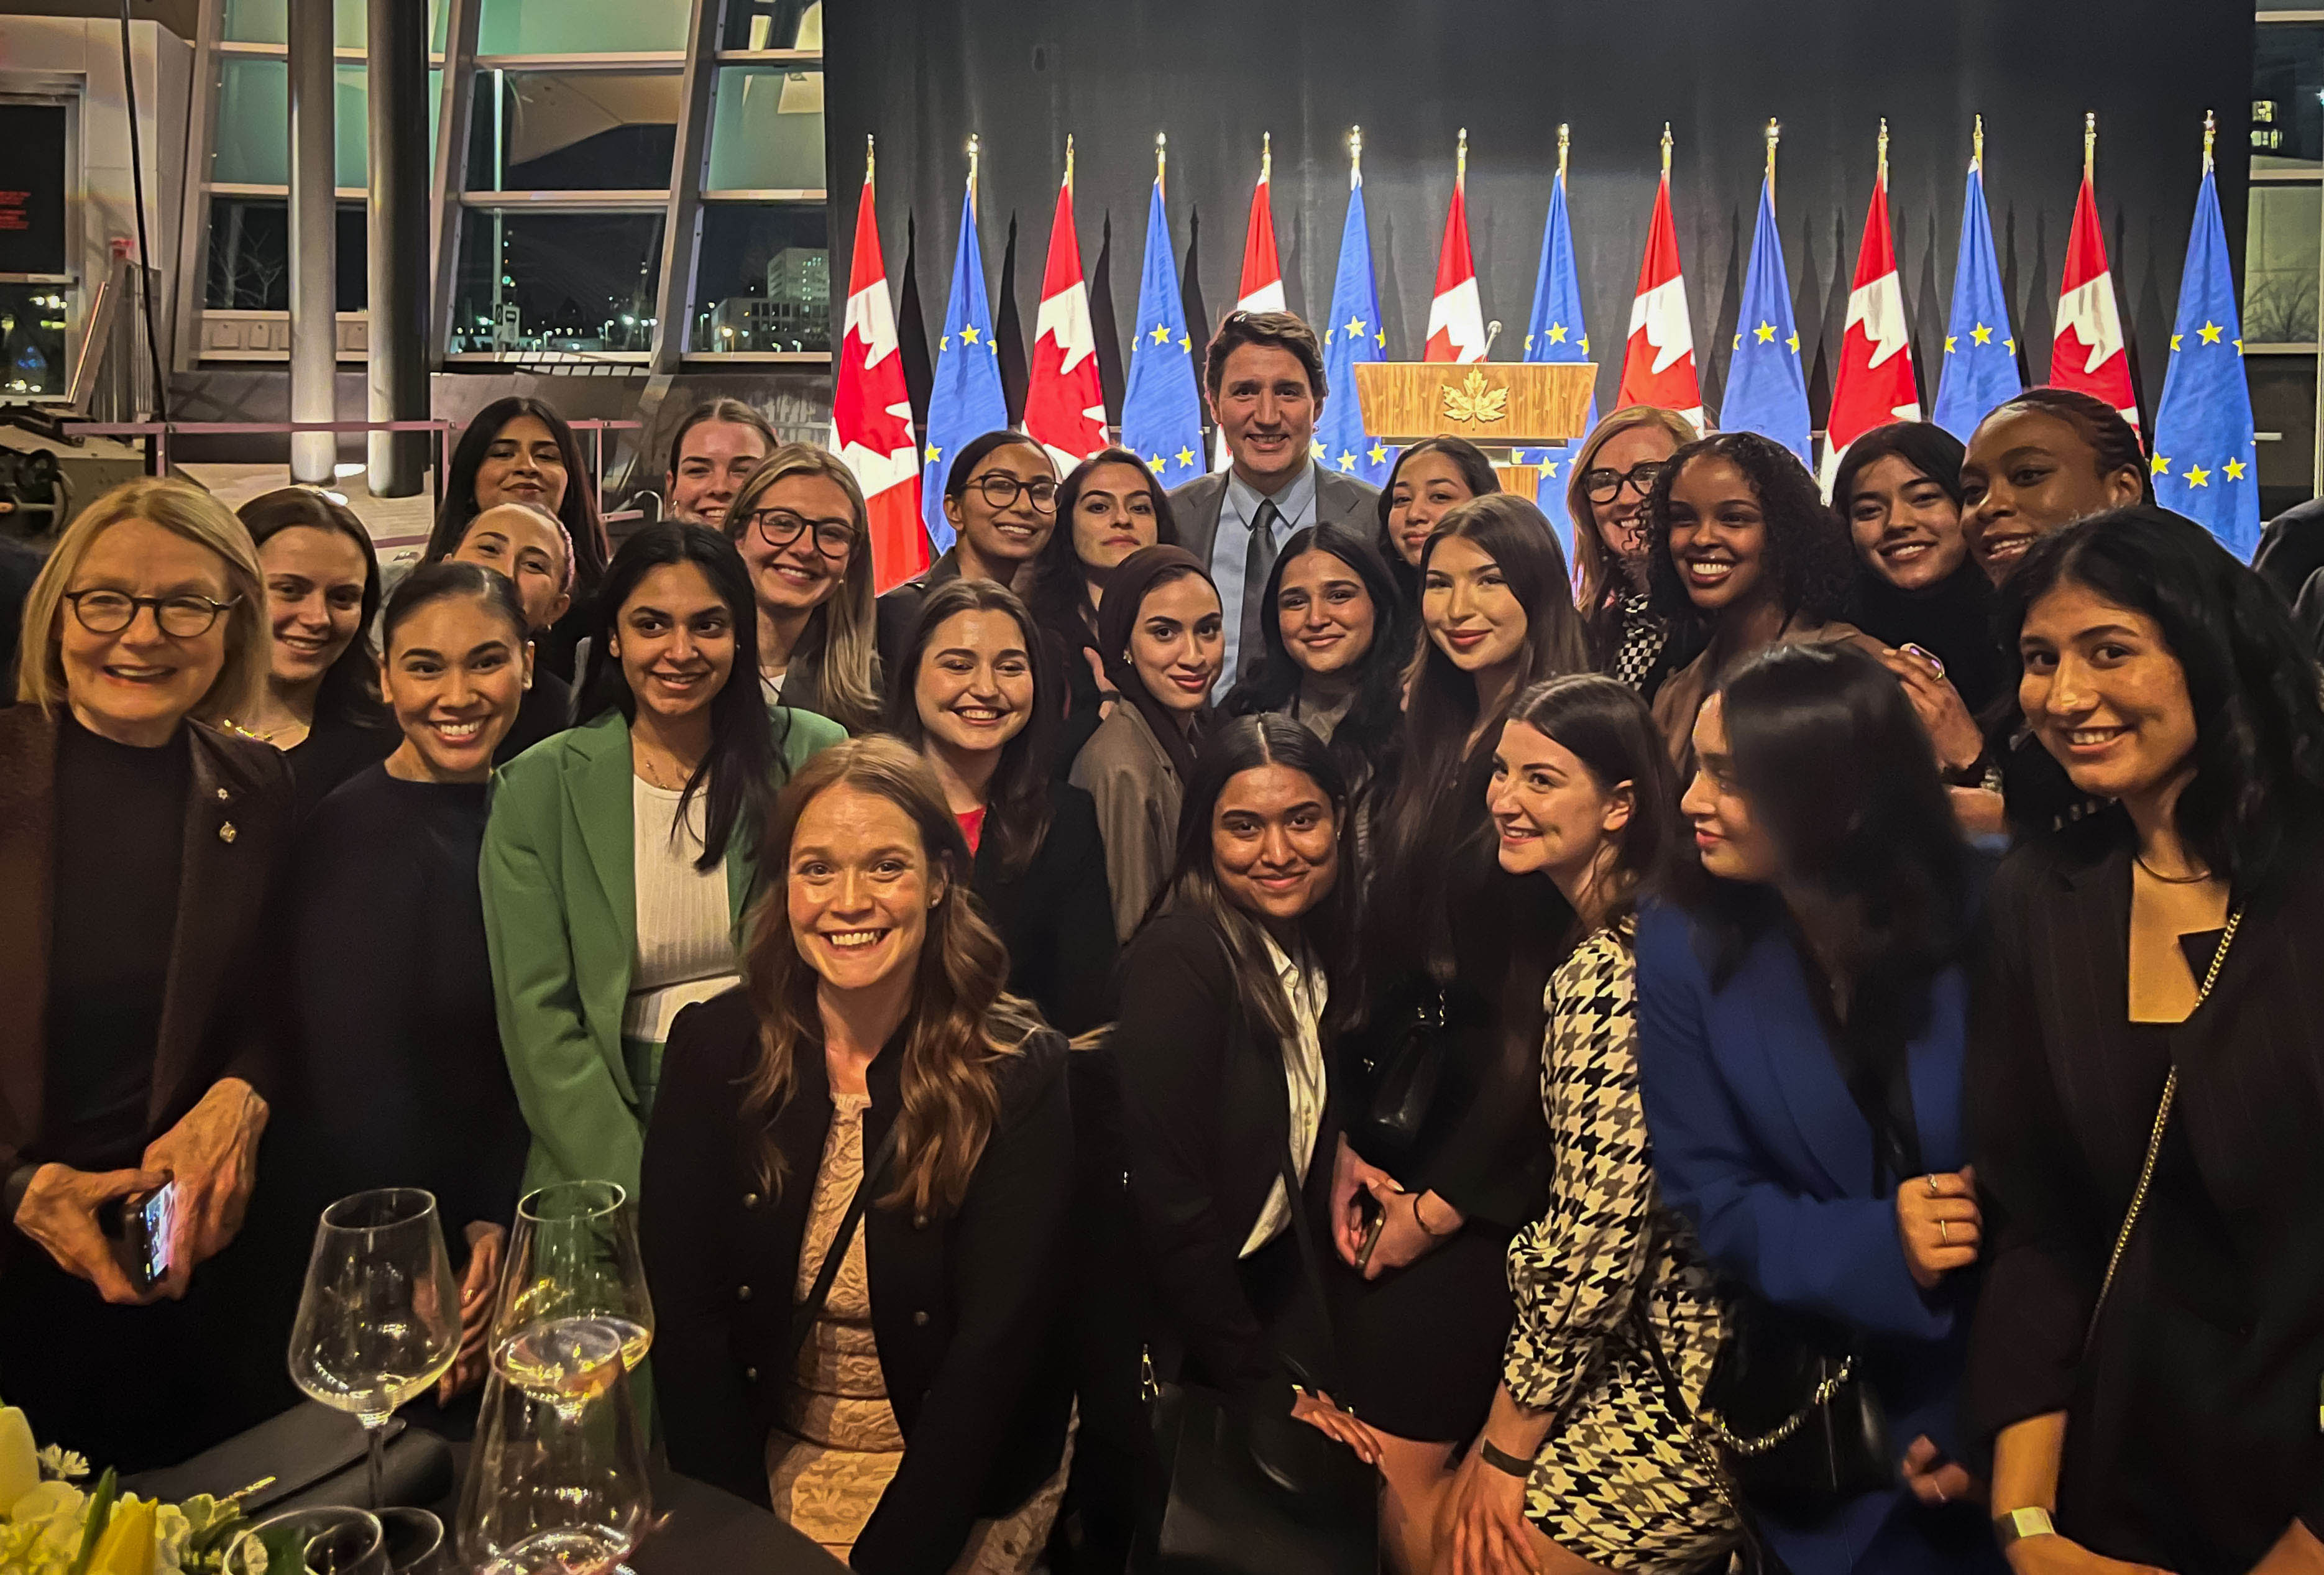 Women in the House Cohort with the Right Honourable Justin Trudeau at the Prime Minister’s Reception.